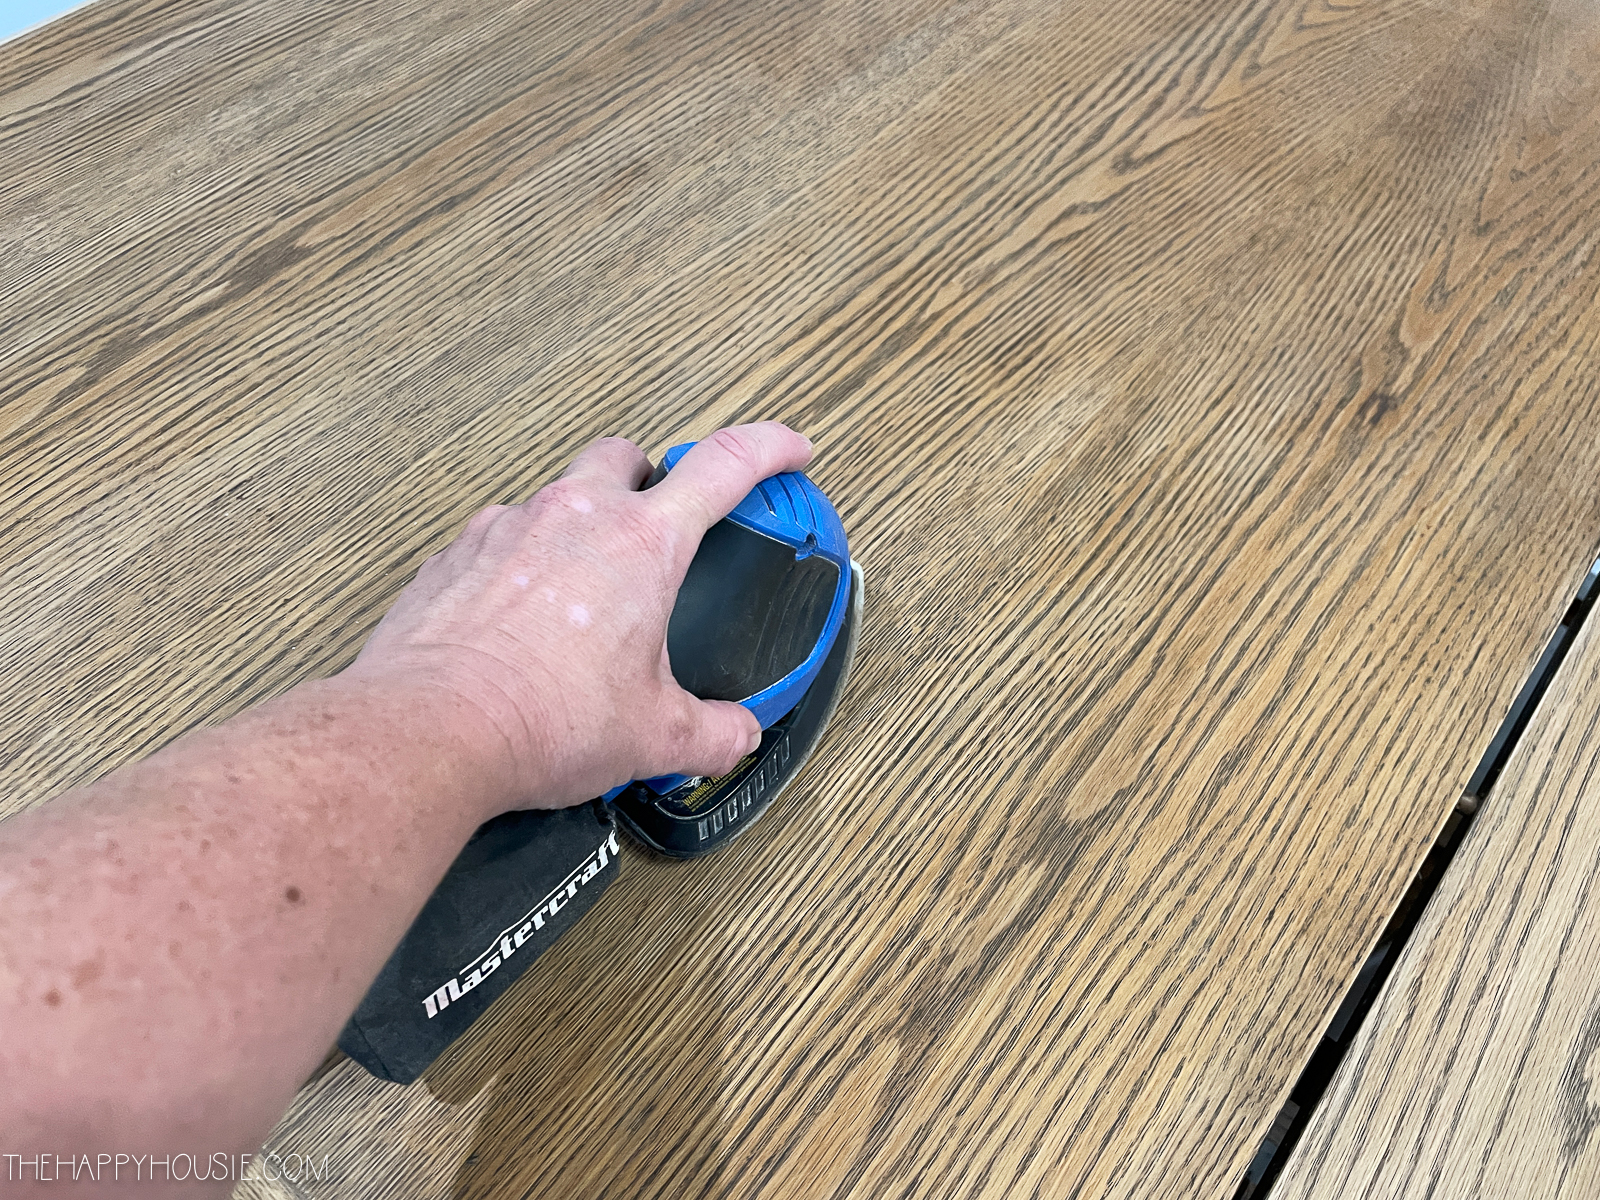 Using a palm sander on the table.